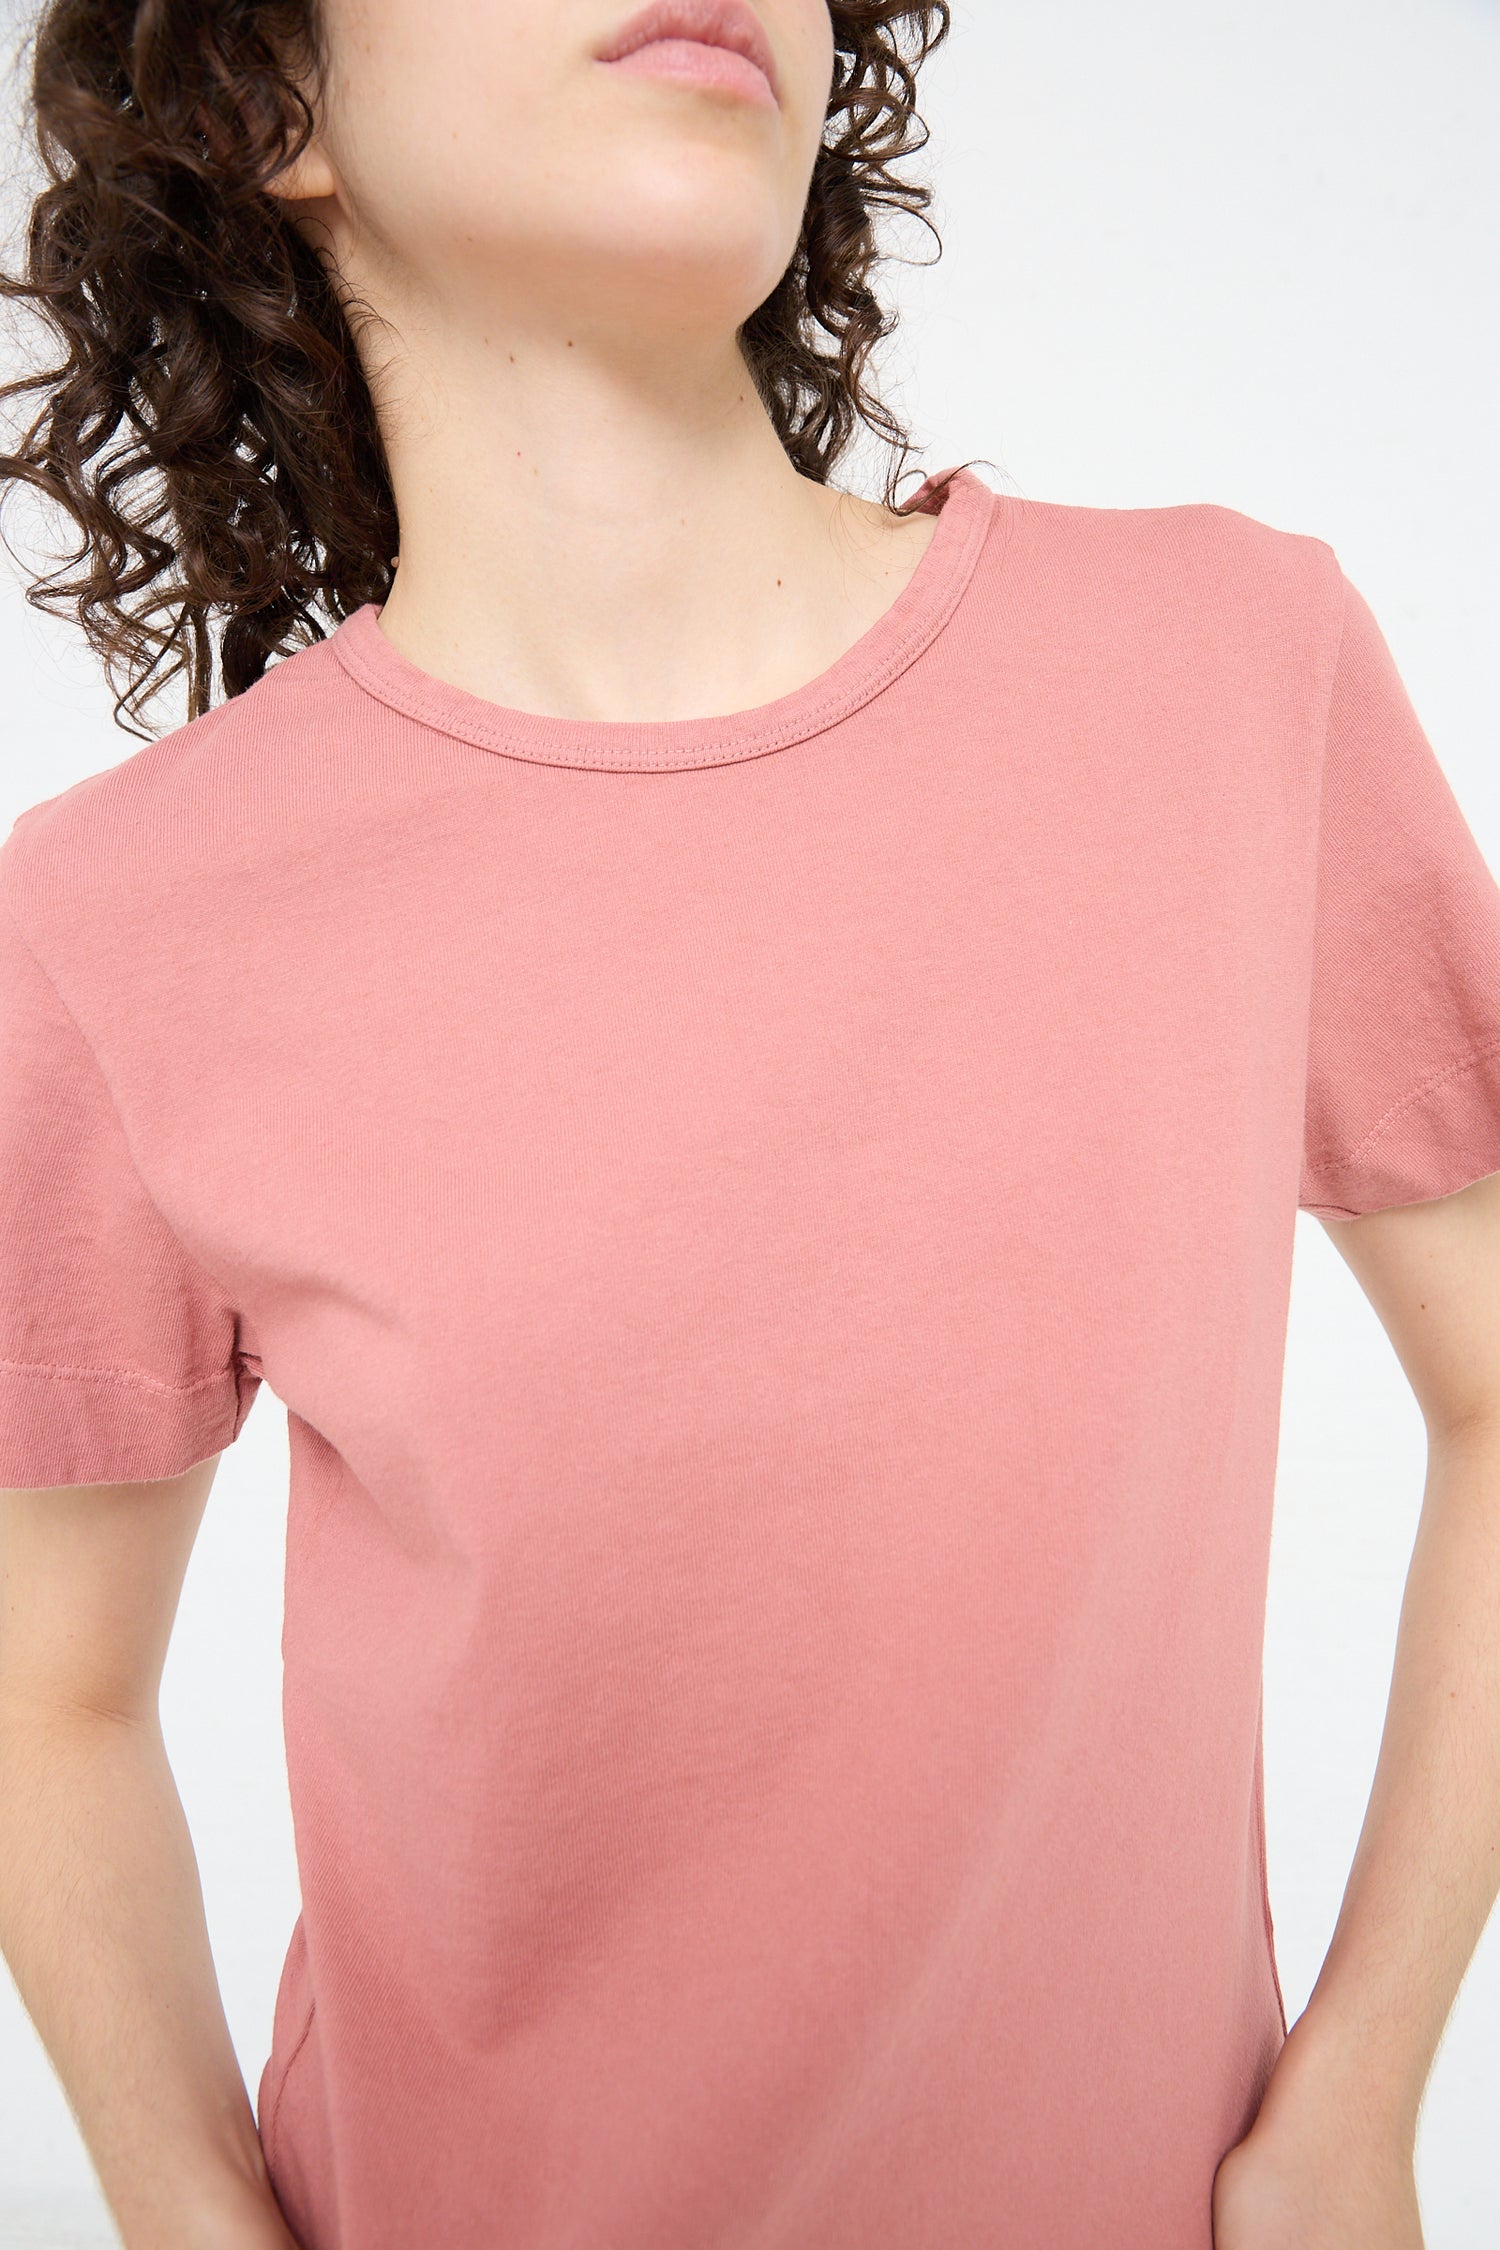 A woman in a pink Jesse Kamm Sailor Tee in Dogwood.